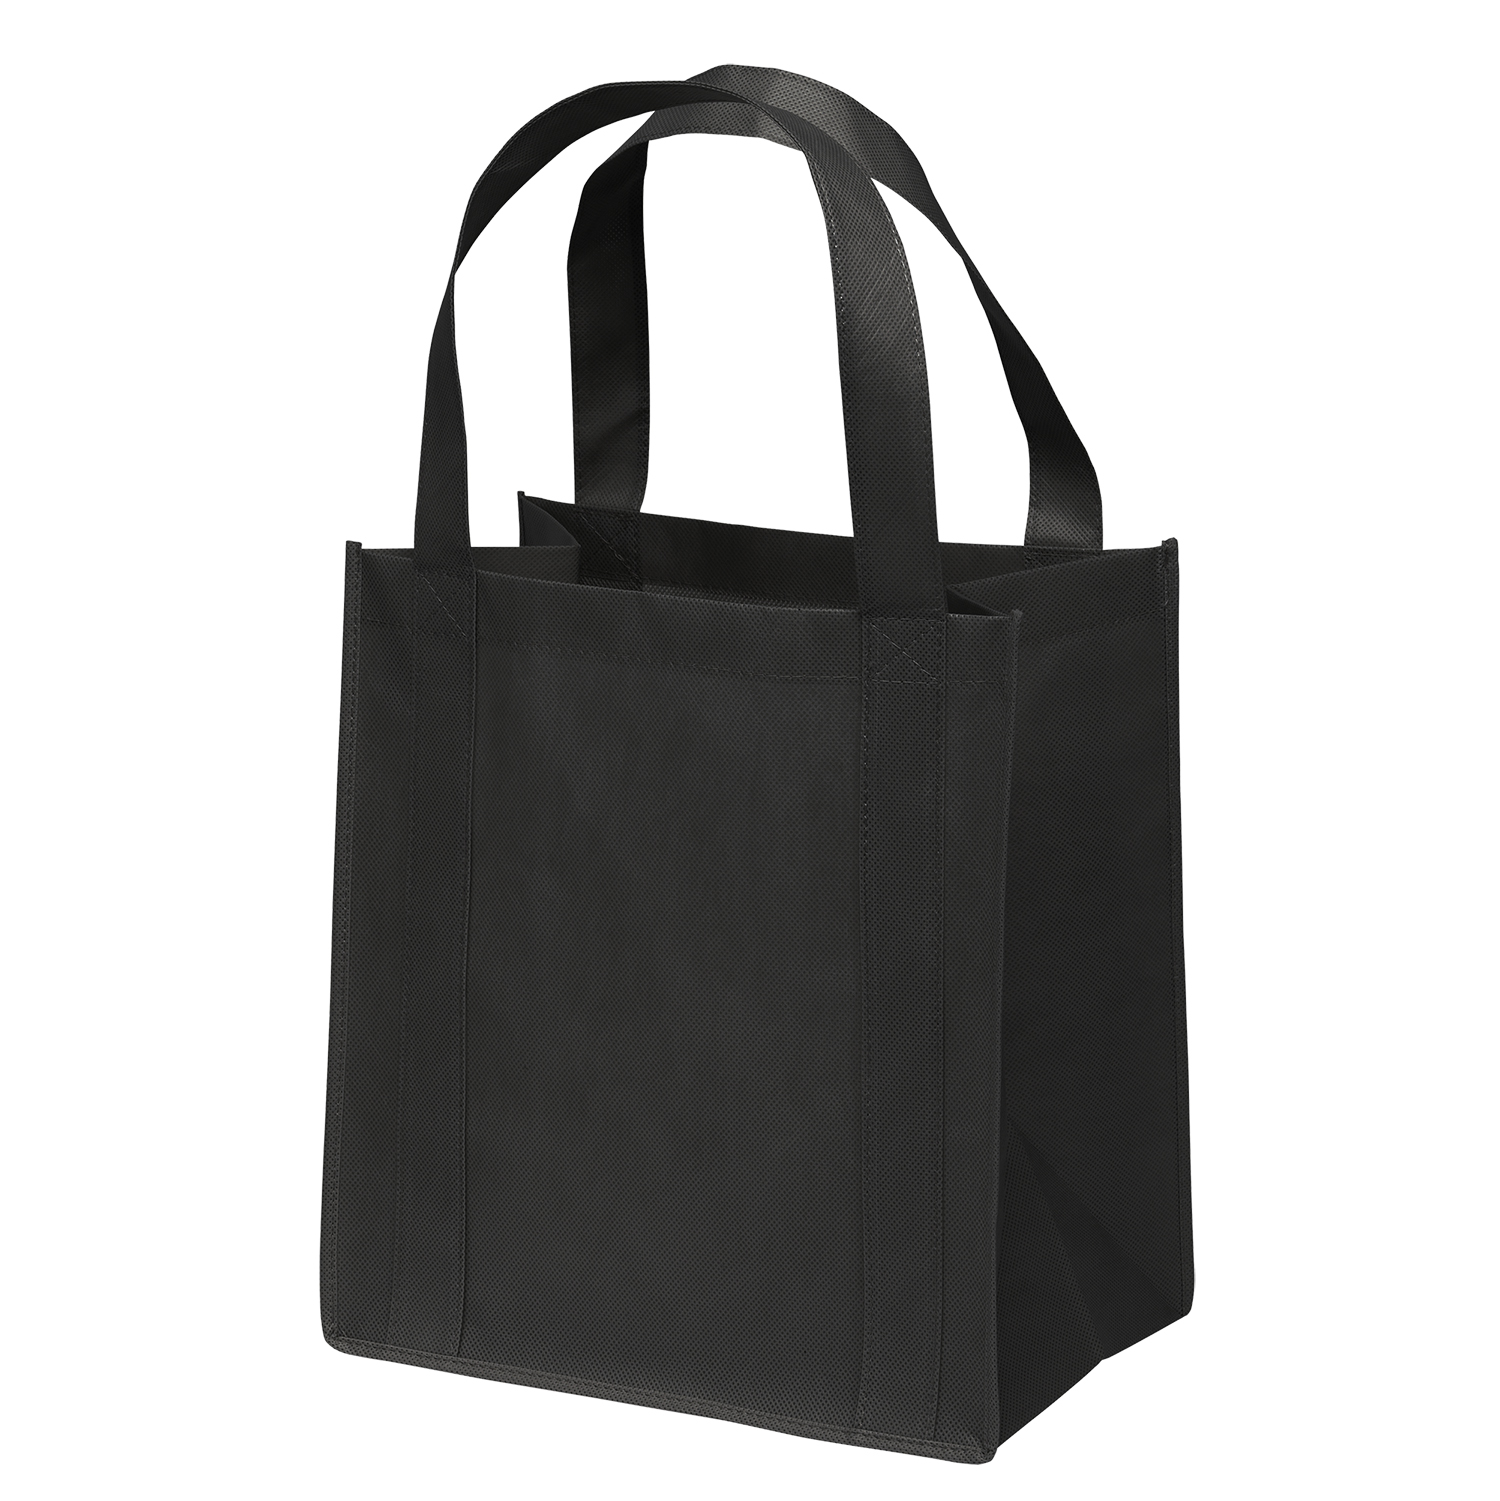 Bag Makers CVB1213 - Custom Printed Eco-Friendly Promotional Non-Woven Little Grocery Tote Bag